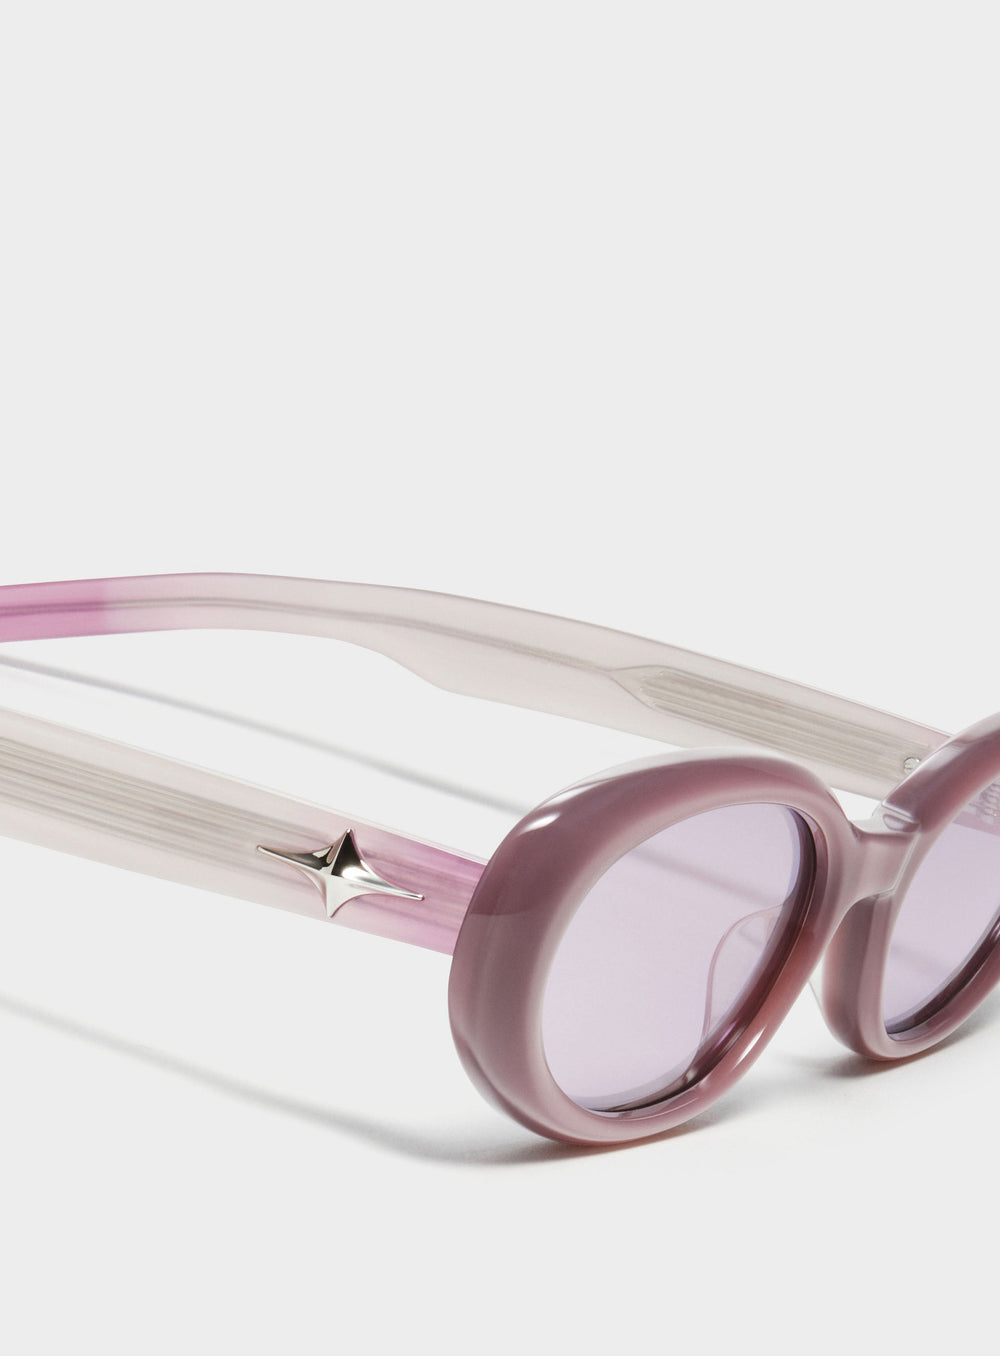 Close-up of Crux in purple round Sunglasses lenses, high-quality eyewear by Mercury Retrograde Galaxy Collection 